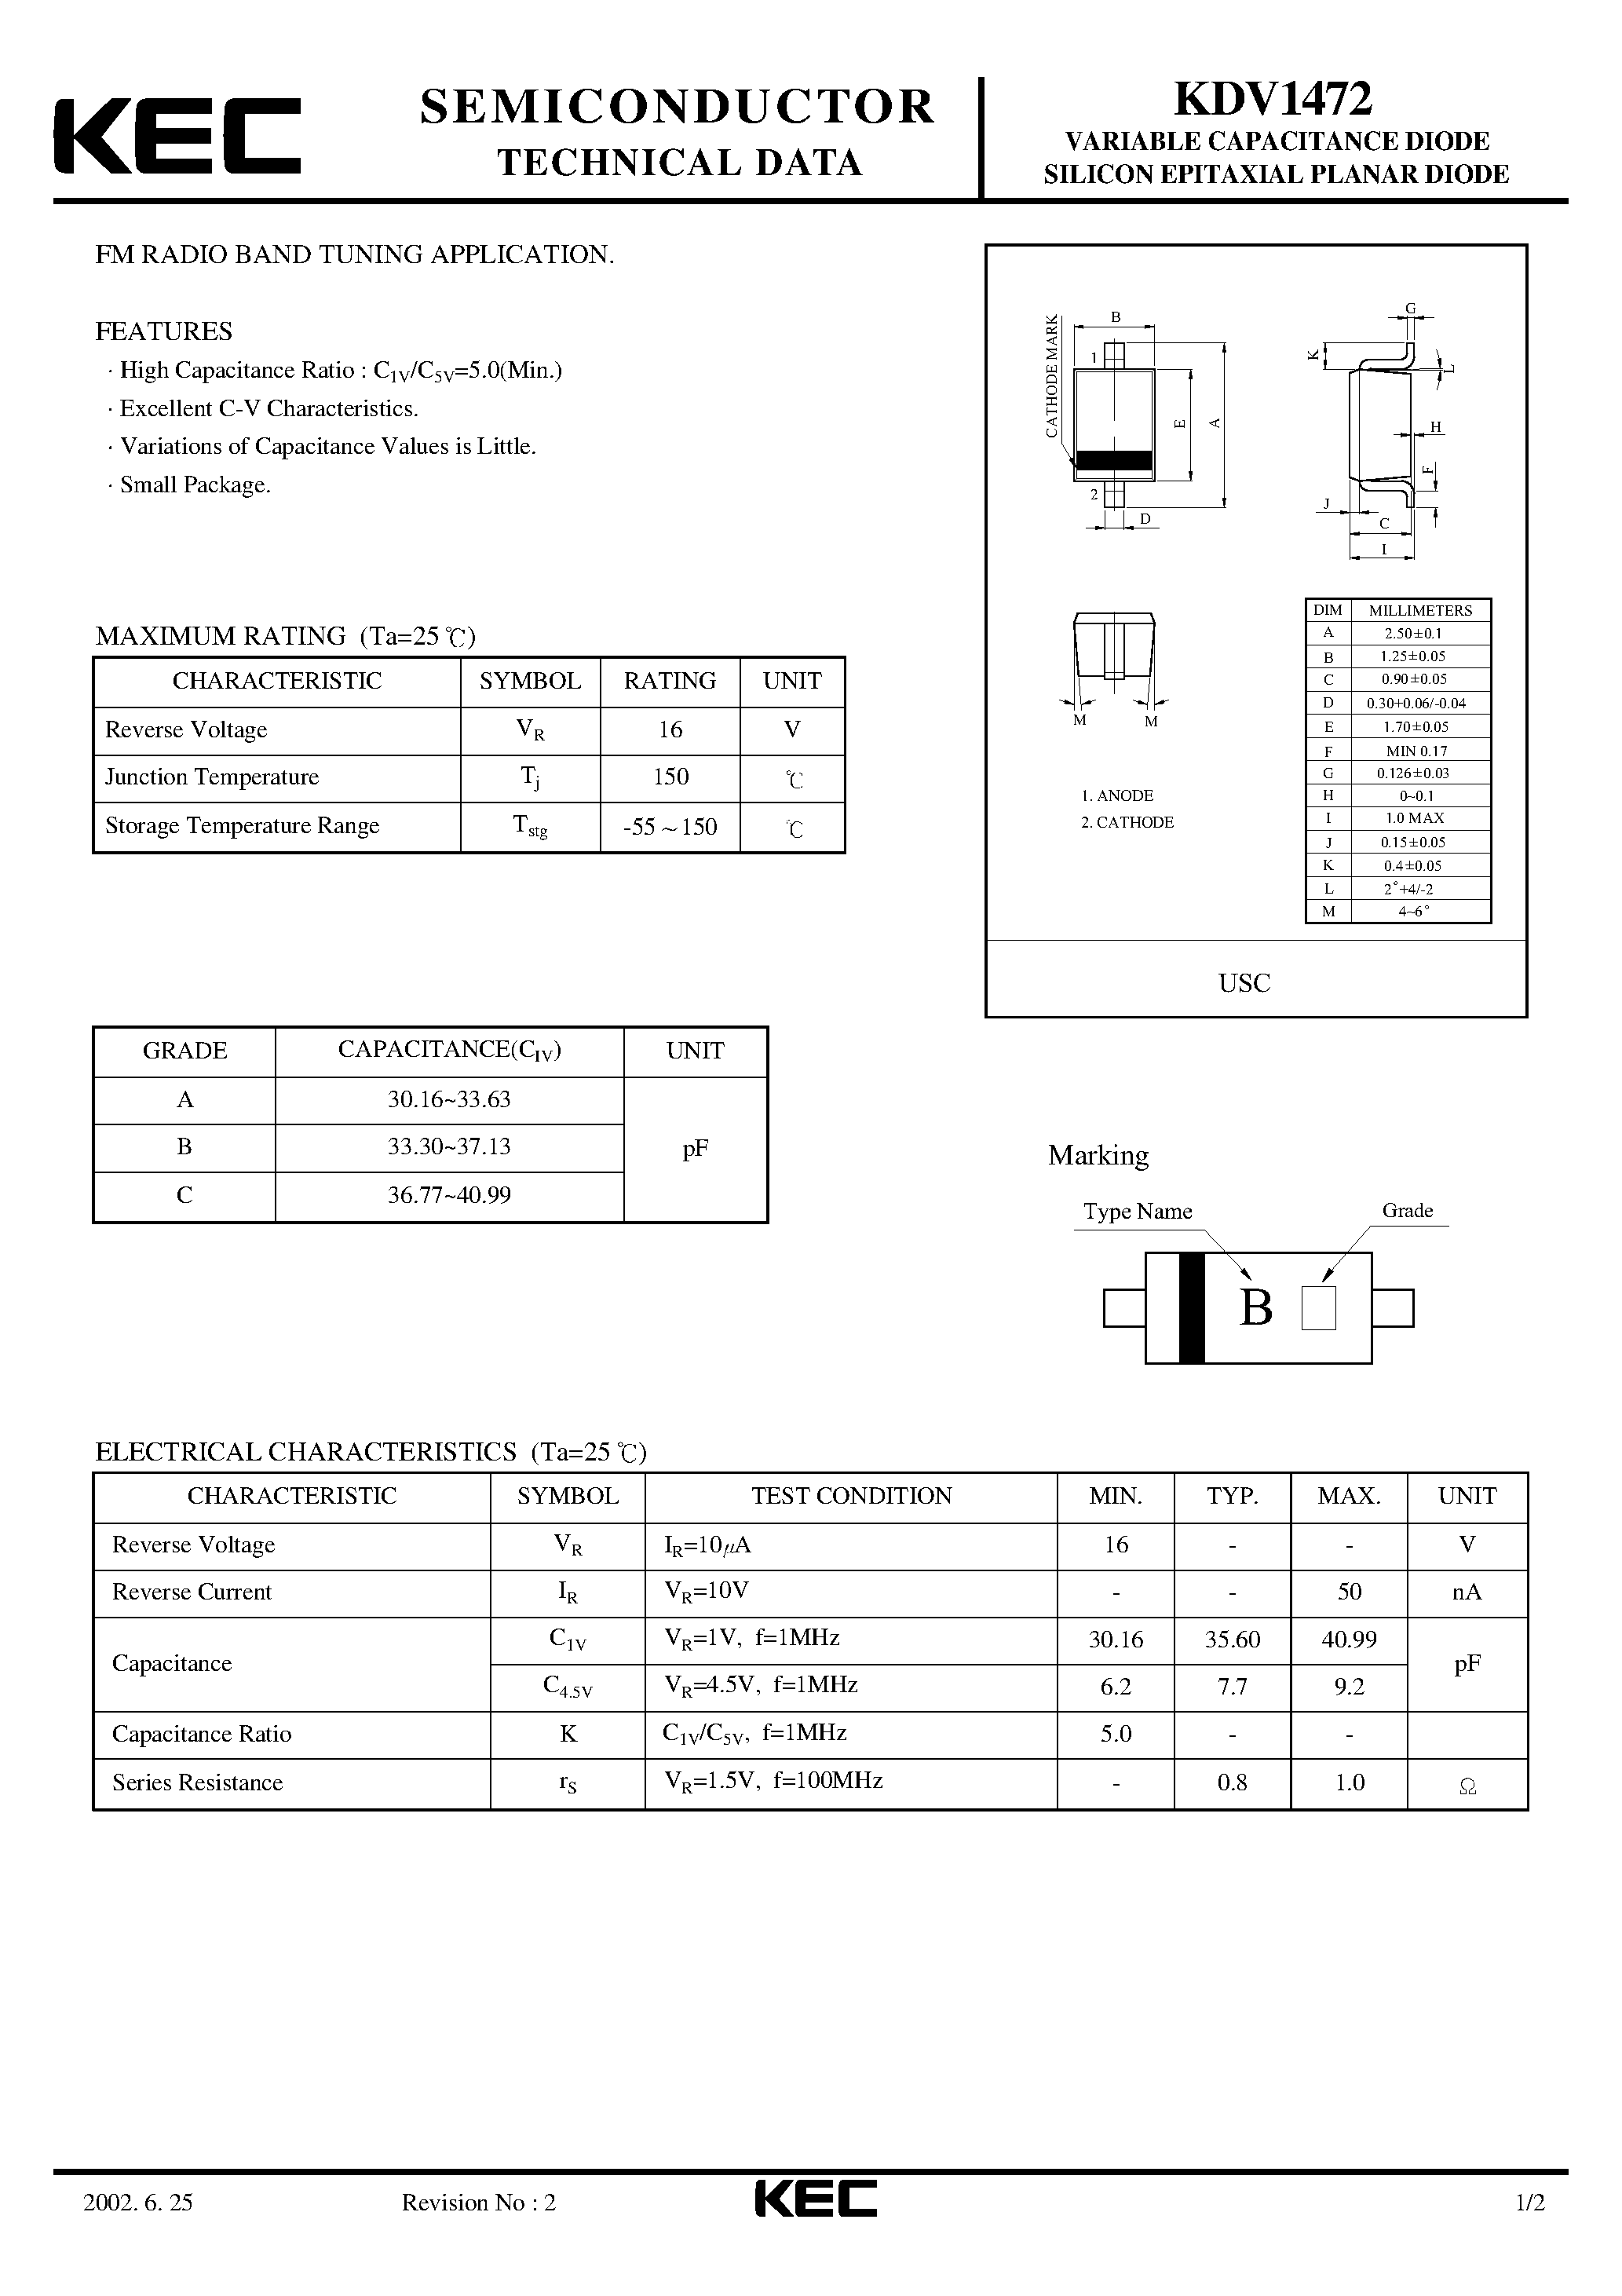 Datasheet KDV1472 - VARIABLE CAPACITANCE DIODE SILICON EPITAXIAL PLANAR DIODE(FM RADIO BAND TUNING) page 1